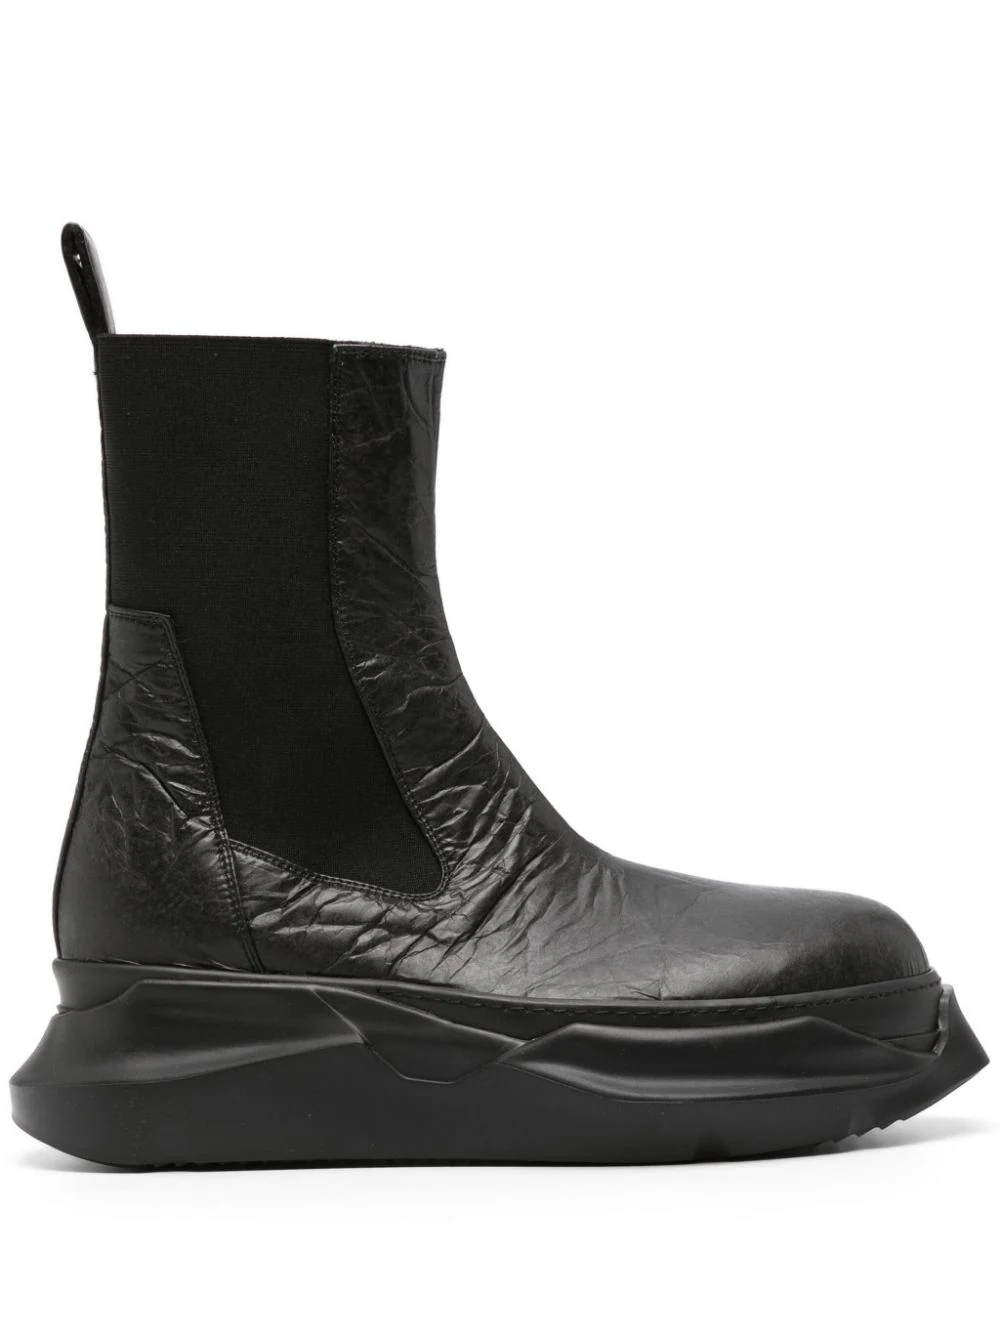 RICK OWENS DRKSHDW Beatle Abstract Boots